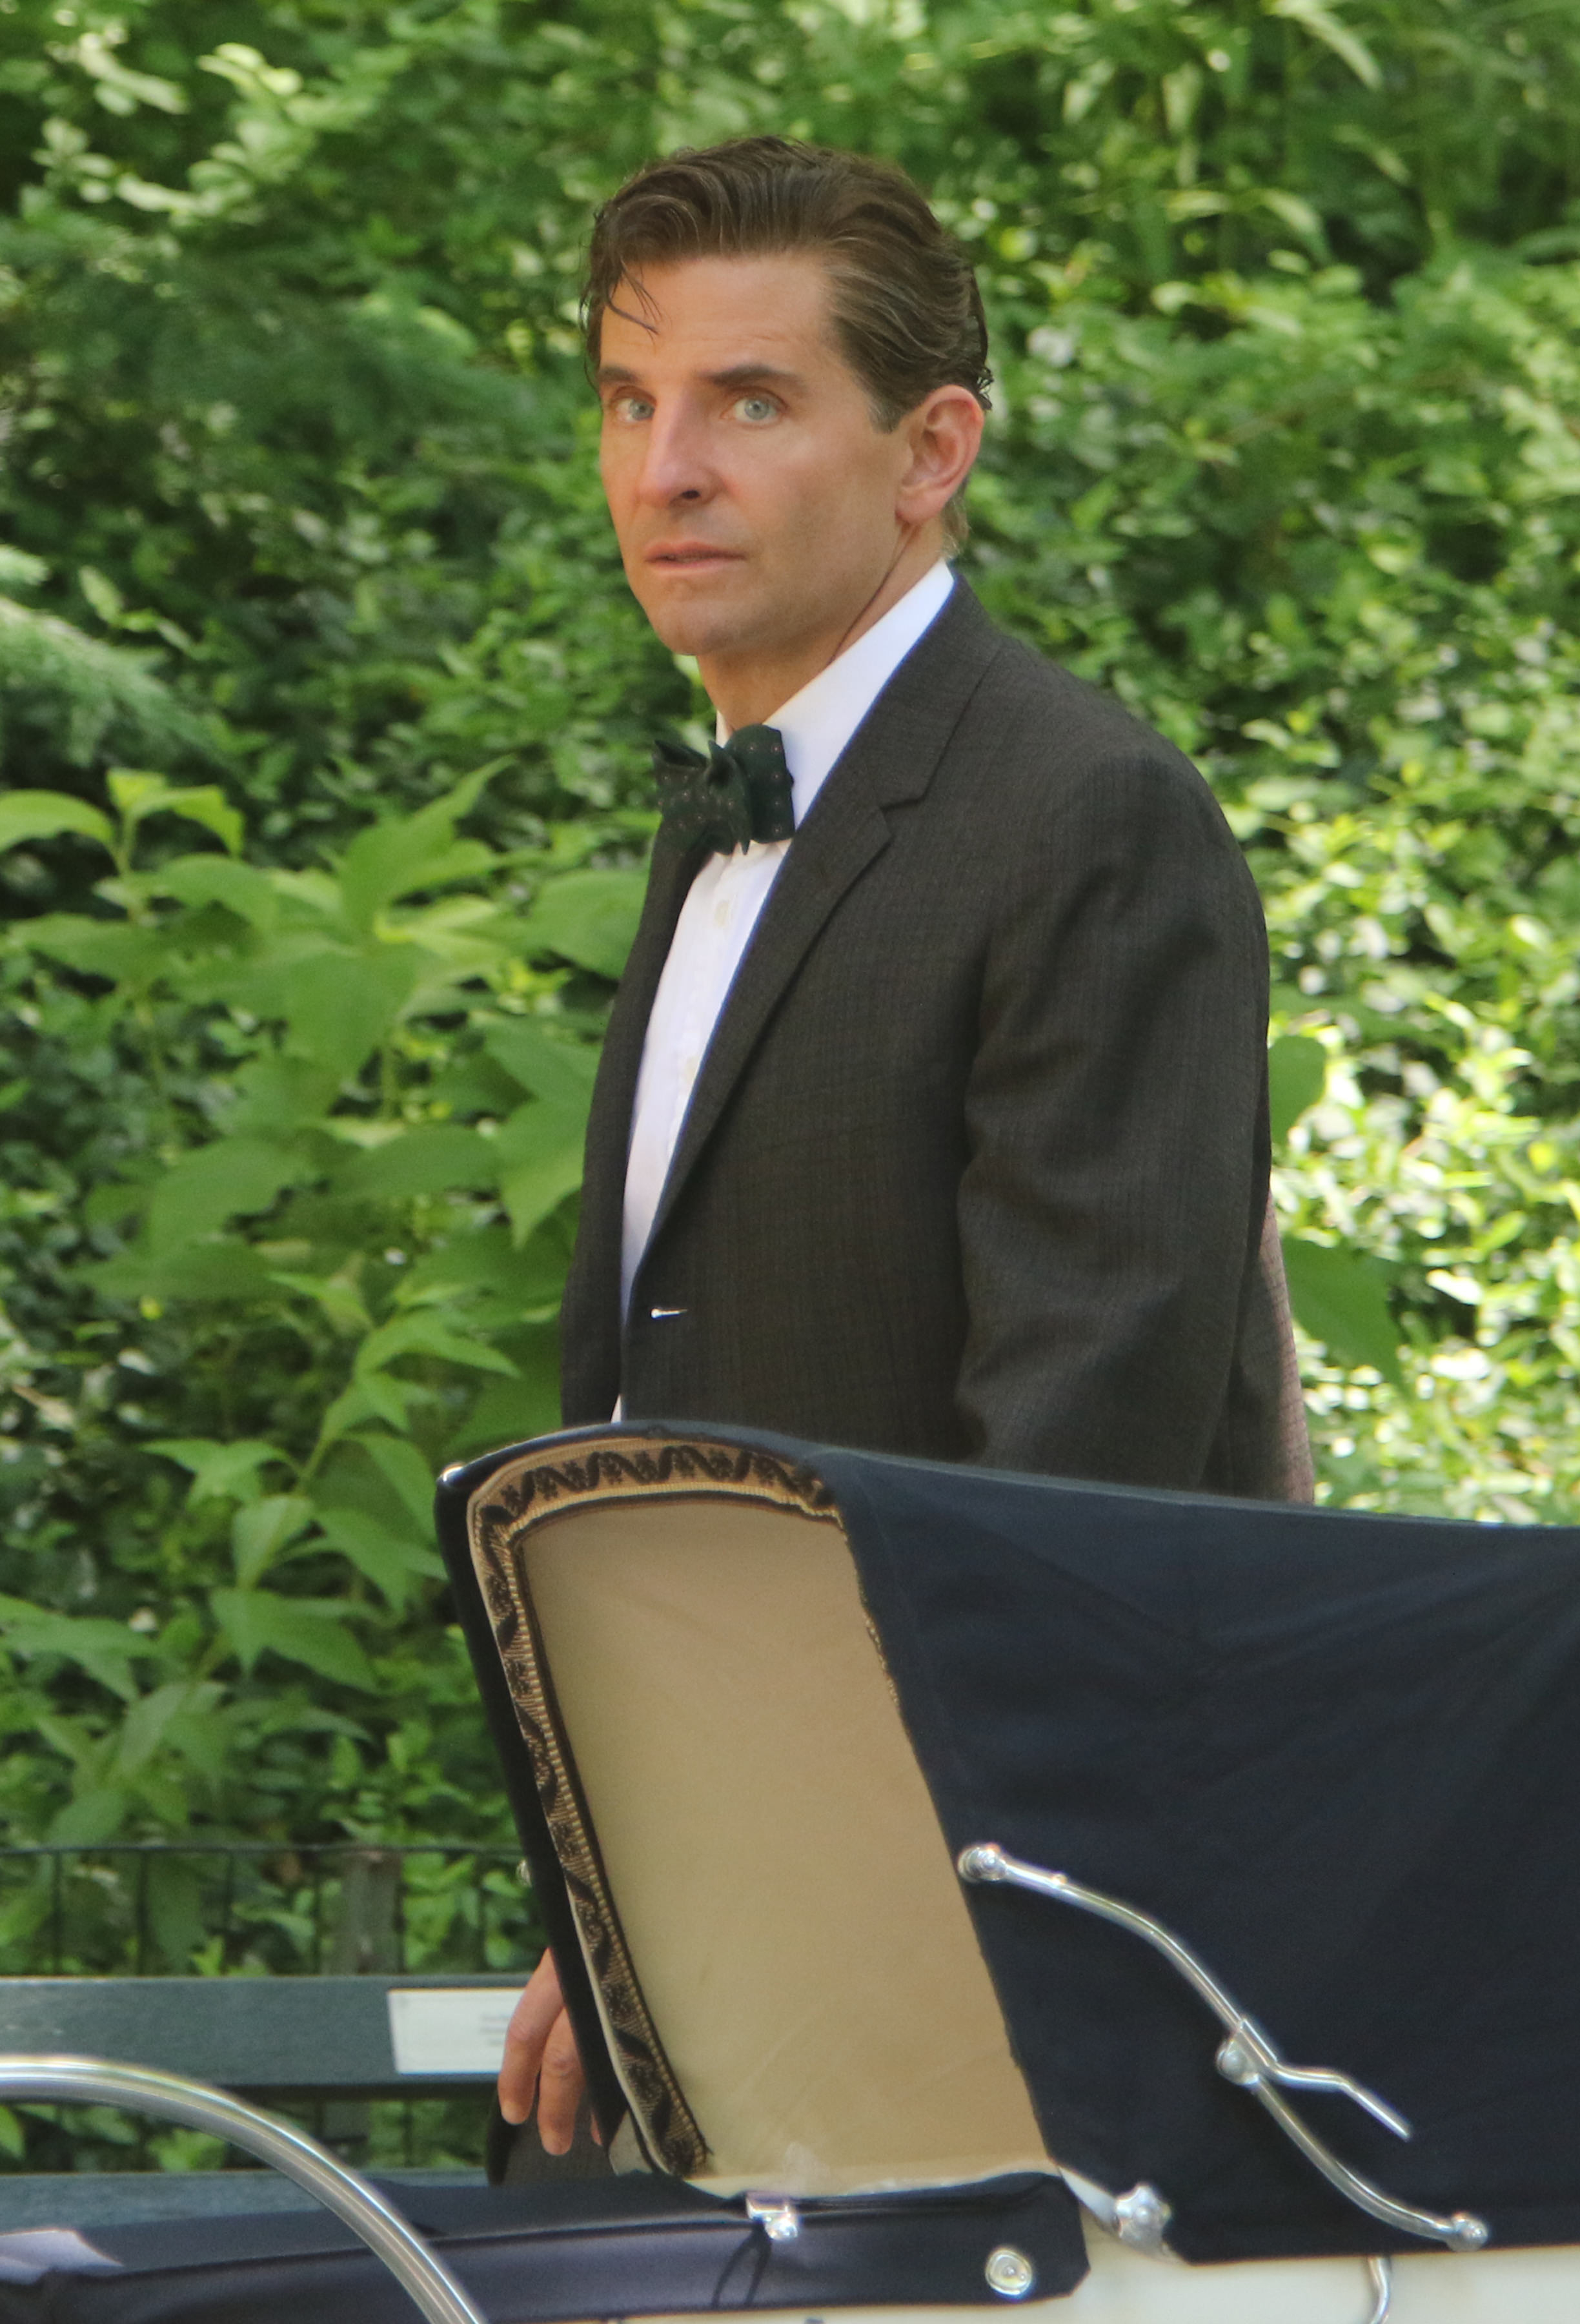 Man in a formal suit and bow tie looking over his shoulder next to a car